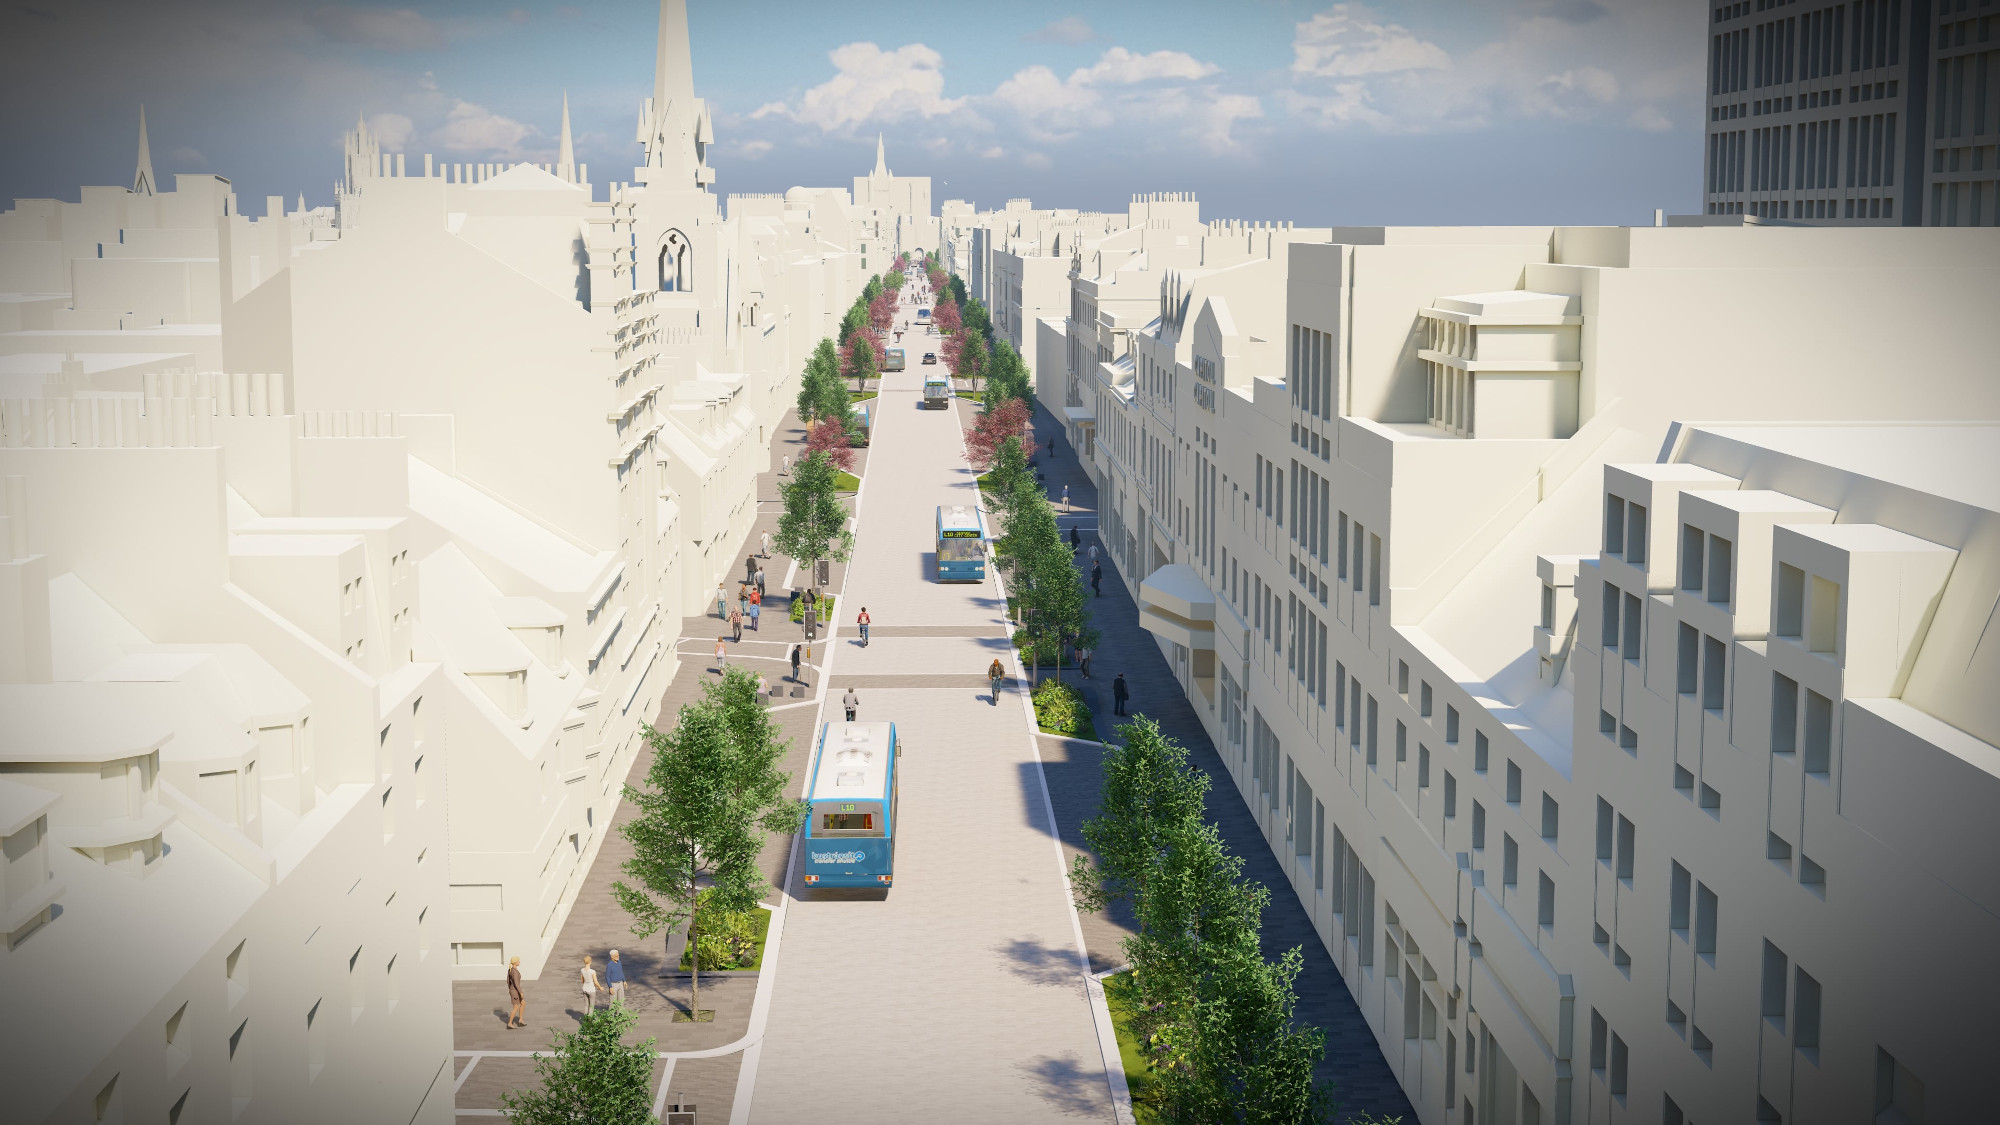 Potential designs for Aberdeen city centre streetscaping unveiled